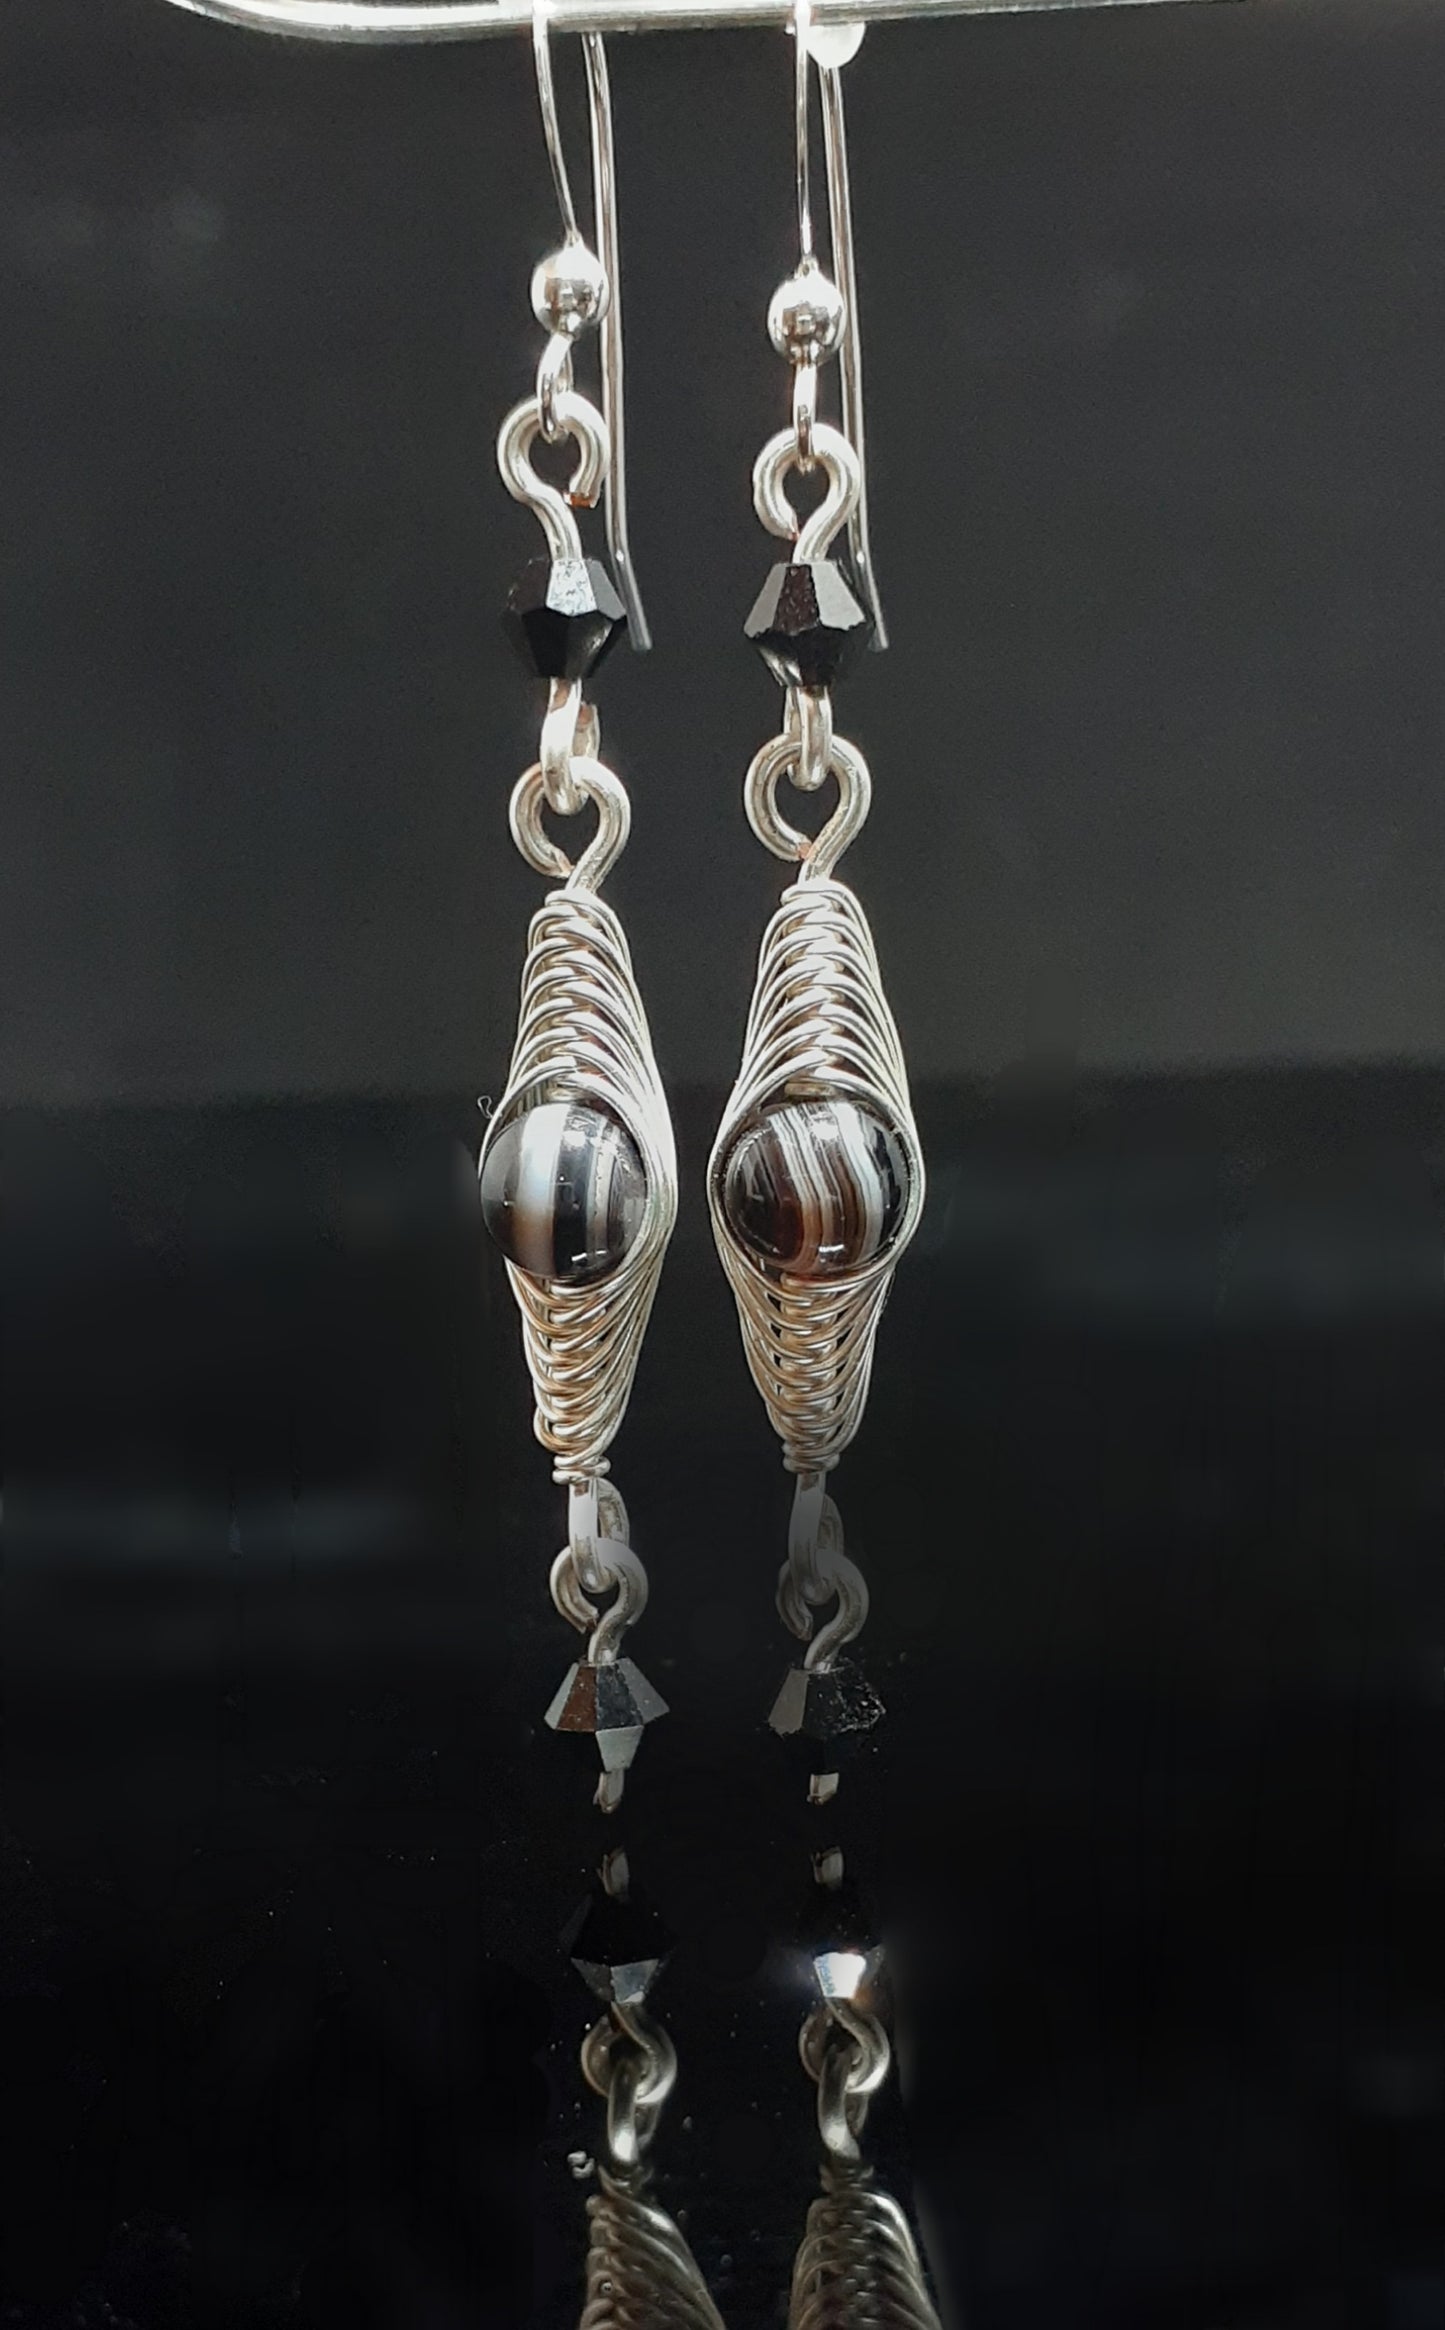 Botswana Agate wrapped in silver wire with Swarovski crystals. Sterling Silver ear wires